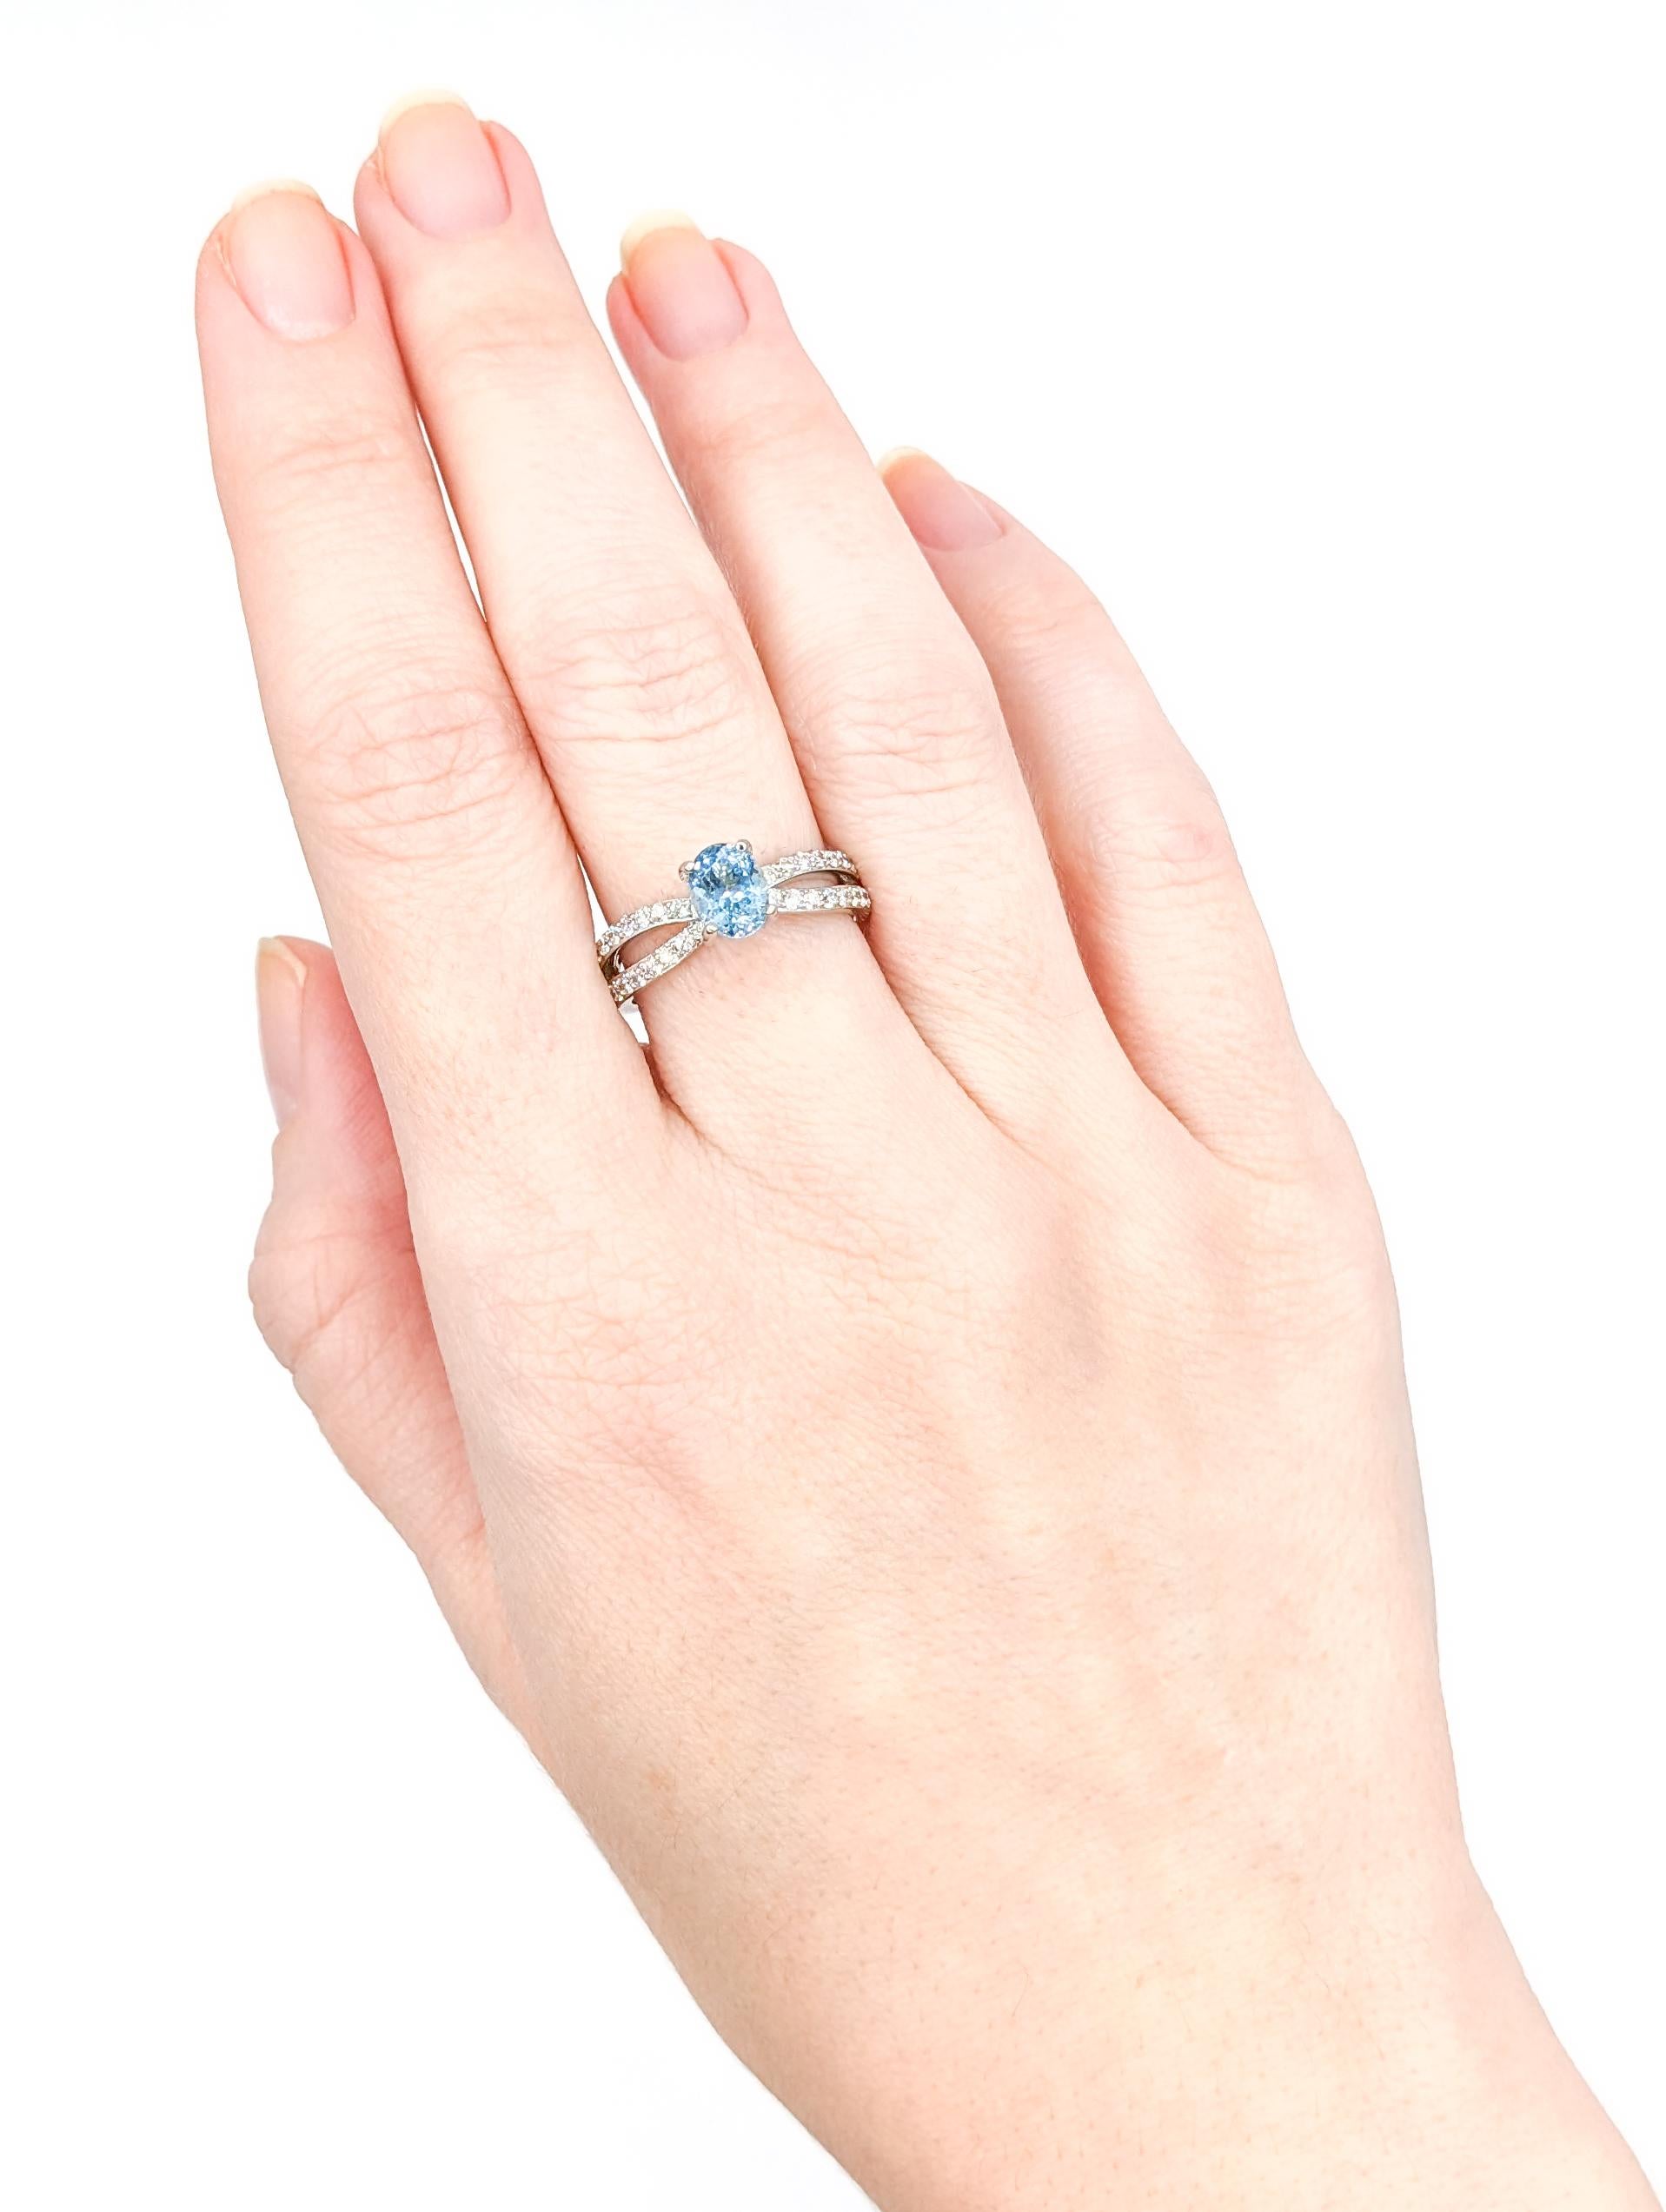 Dreamy Aquamarine & Diamond Ring in 18k White Gold

Elevate your style with this exquisite 18k white gold ring, a true embodiment of beauty and sophistication. This stunning piece showcases a captivating .85ct oval cut Aquamarine complemented by